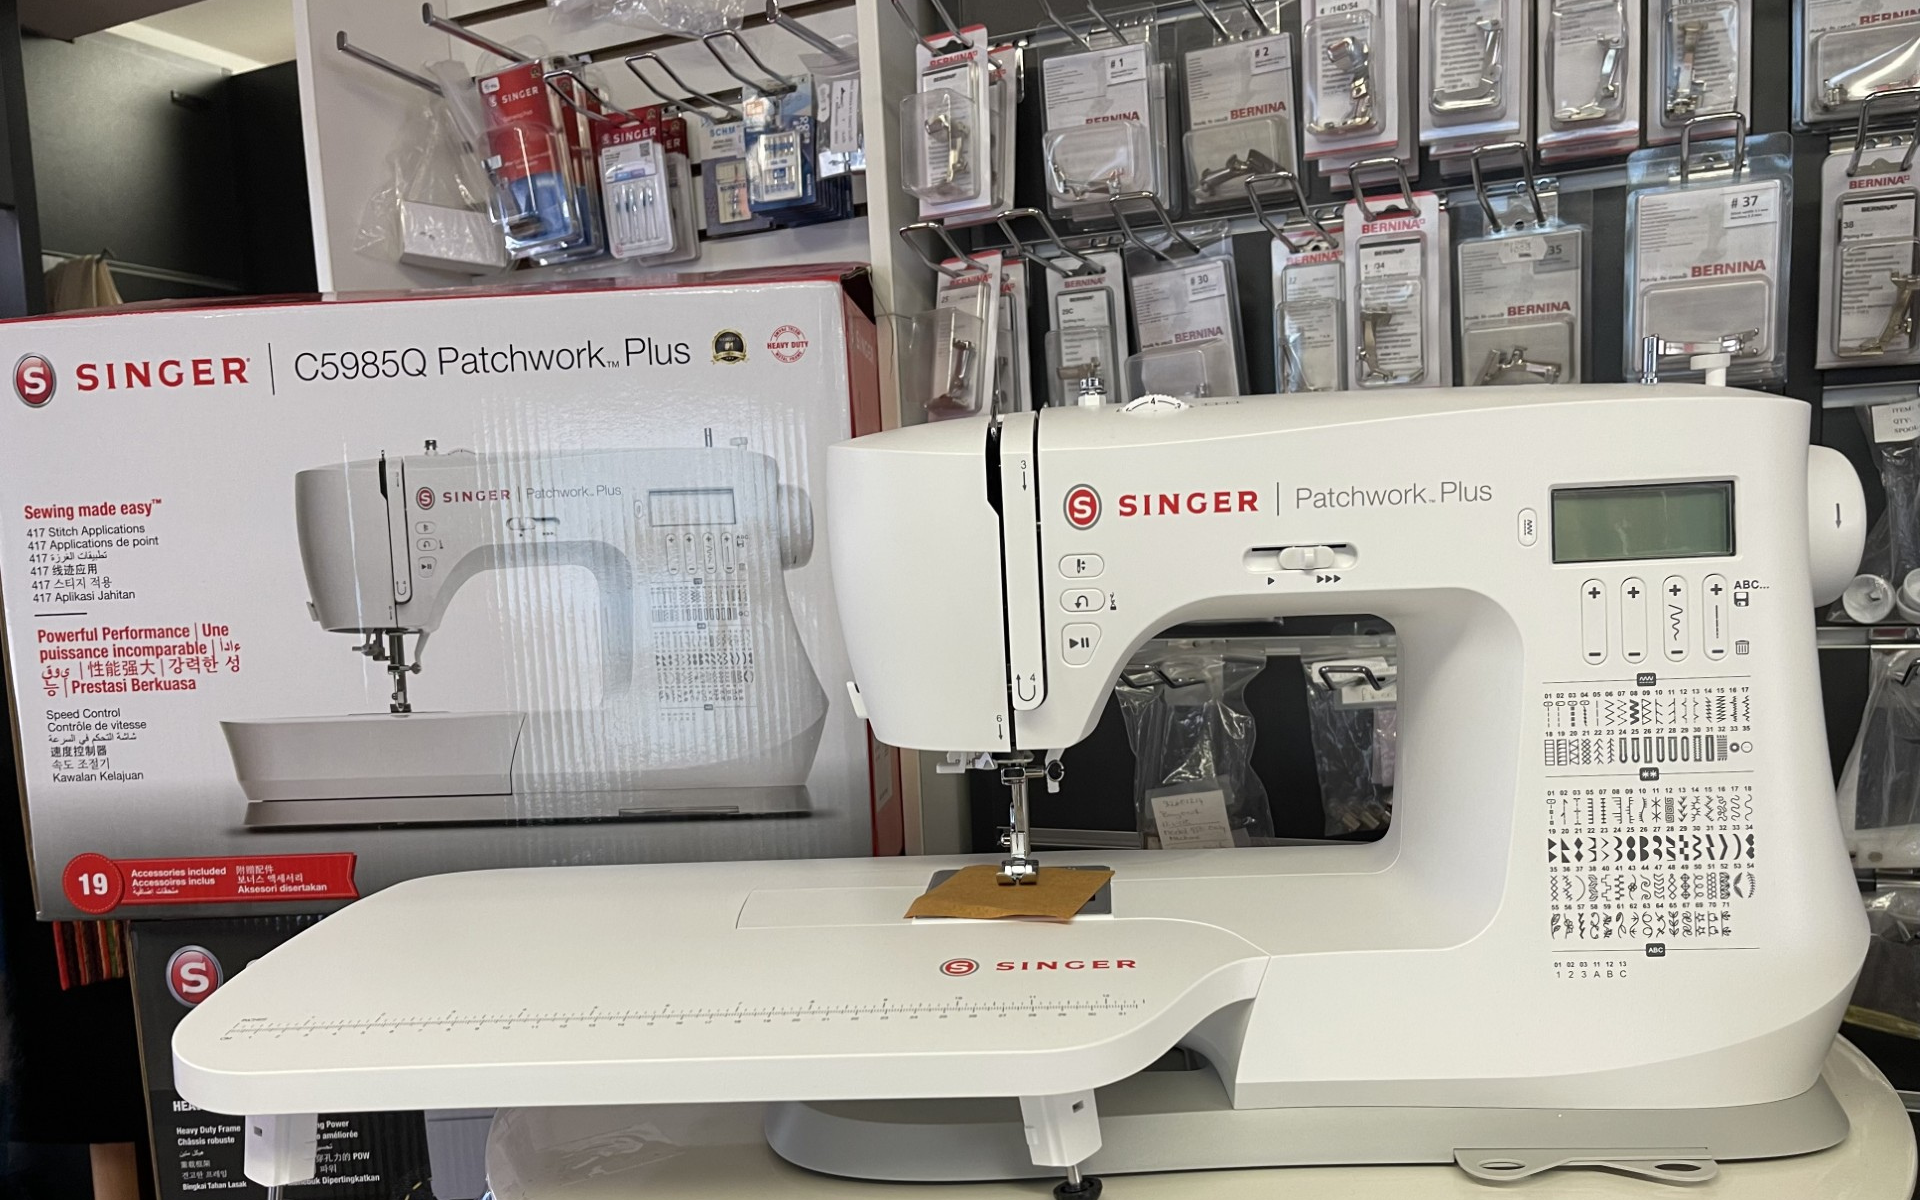 A singer C5985Q Patchwork Plus sewing machine is sitting on a table in a store